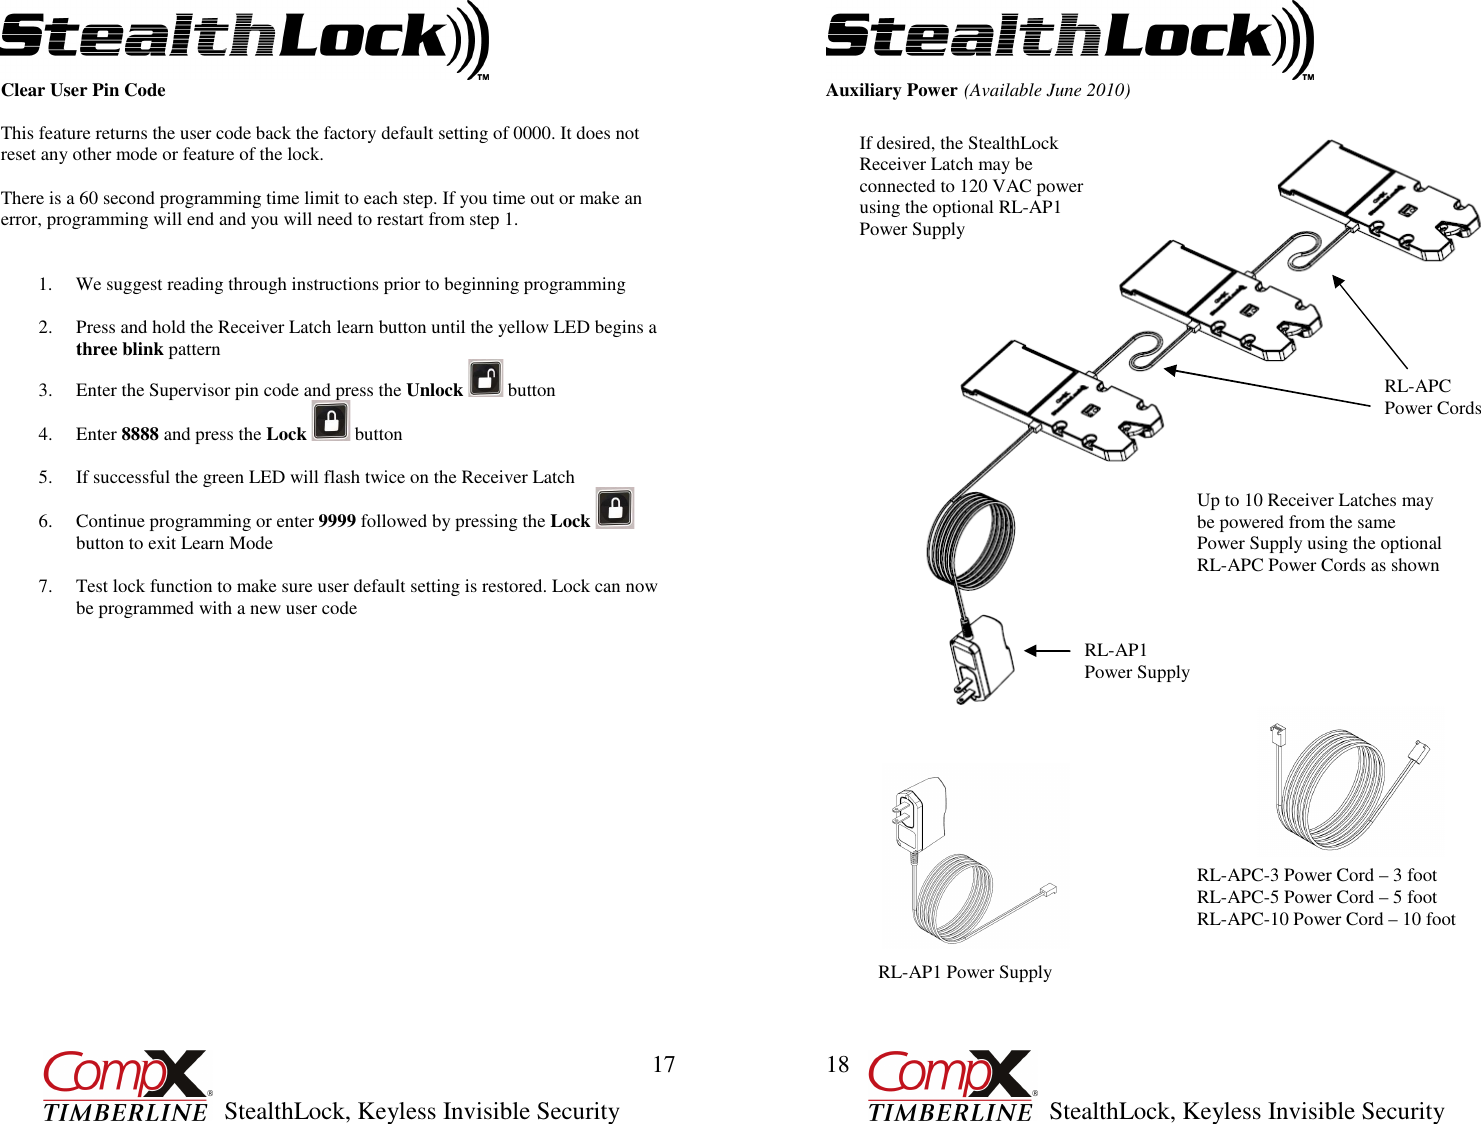         StealthLock, Keyless Invisible Security  17 Clear User Pin Code  This feature returns the user code back the factory default setting of 0000. It does not reset any other mode or feature of the lock.  There is a 60 second programming time limit to each step. If you time out or make an error, programming will end and you will need to restart from step 1.   1. We suggest reading through instructions prior to beginning programming  2. Press and hold the Receiver Latch learn button until the yellow LED begins a three blink pattern 3. Enter the Supervisor pin code and press the Unlock   button 4. Enter 8888 and press the Lock   button  5. If successful the green LED will flash twice on the Receiver Latch  6. Continue programming or enter 9999 followed by pressing the Lock   button to exit Learn Mode  7. Test lock function to make sure user default setting is restored. Lock can now be programmed with a new user code                                      StealthLock, Keyless Invisible Security  18 Auxiliary Power (Available June 2010)   If desired, the StealthLock Receiver Latch may be connected to 120 VAC power using the optional RL-AP1 Power Supply Up to 10 Receiver Latches may be powered from the same Power Supply using the optional RL-APC Power Cords as shown RL-APC Power Cords RL-AP1 Power Supply RL-AP1 Power Supply  RL-APC-3 Power Cord – 3 foot RL-APC-5 Power Cord – 5 foot RL-APC-10 Power Cord – 10 foot 